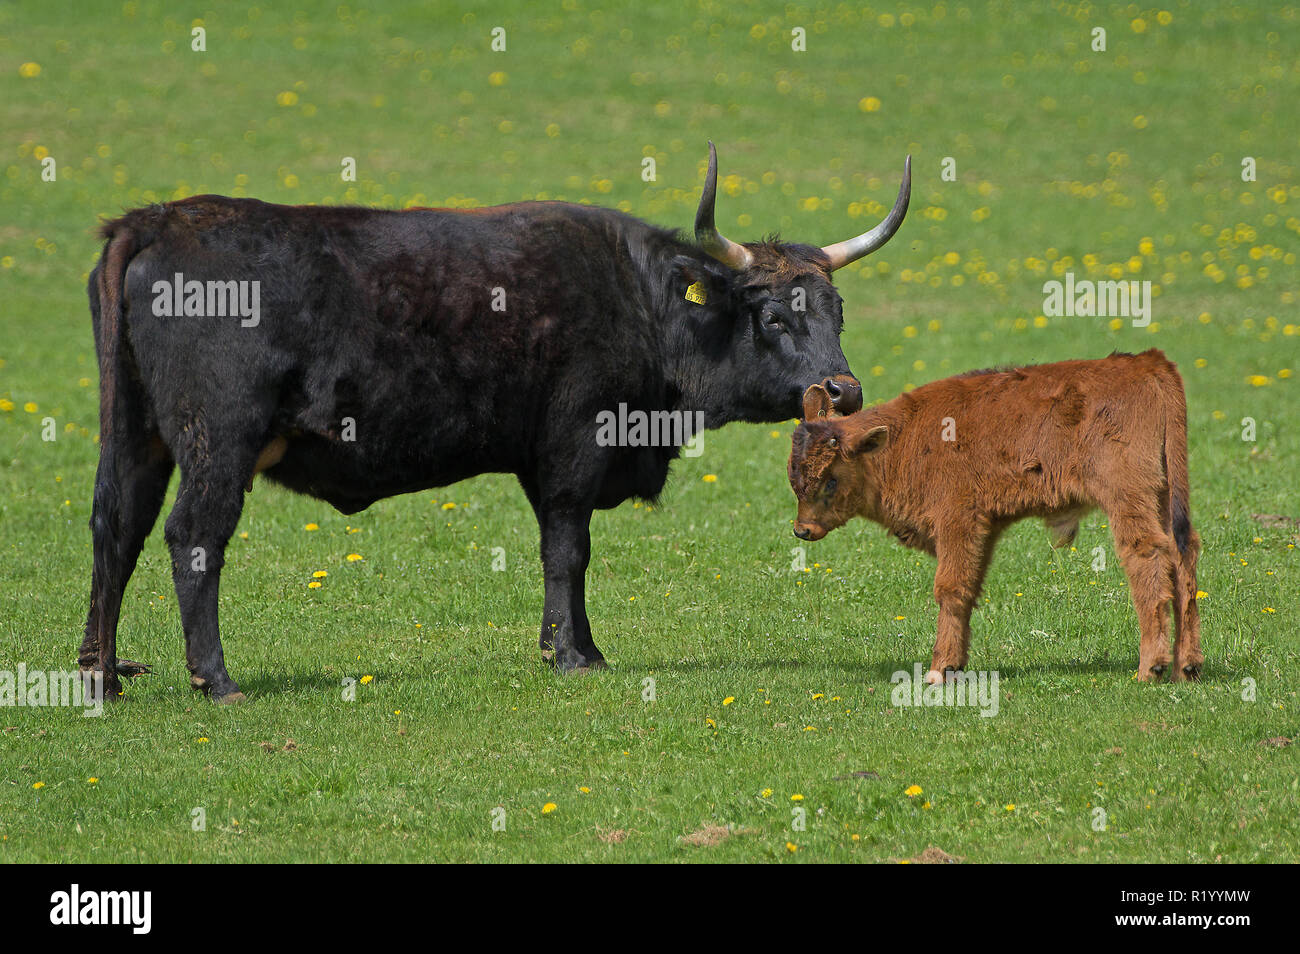 Recreated Aurochs, Heck Cattle (Bos primigenius primigenius). Cow licking calf on a meadow. Germany Stock Photo